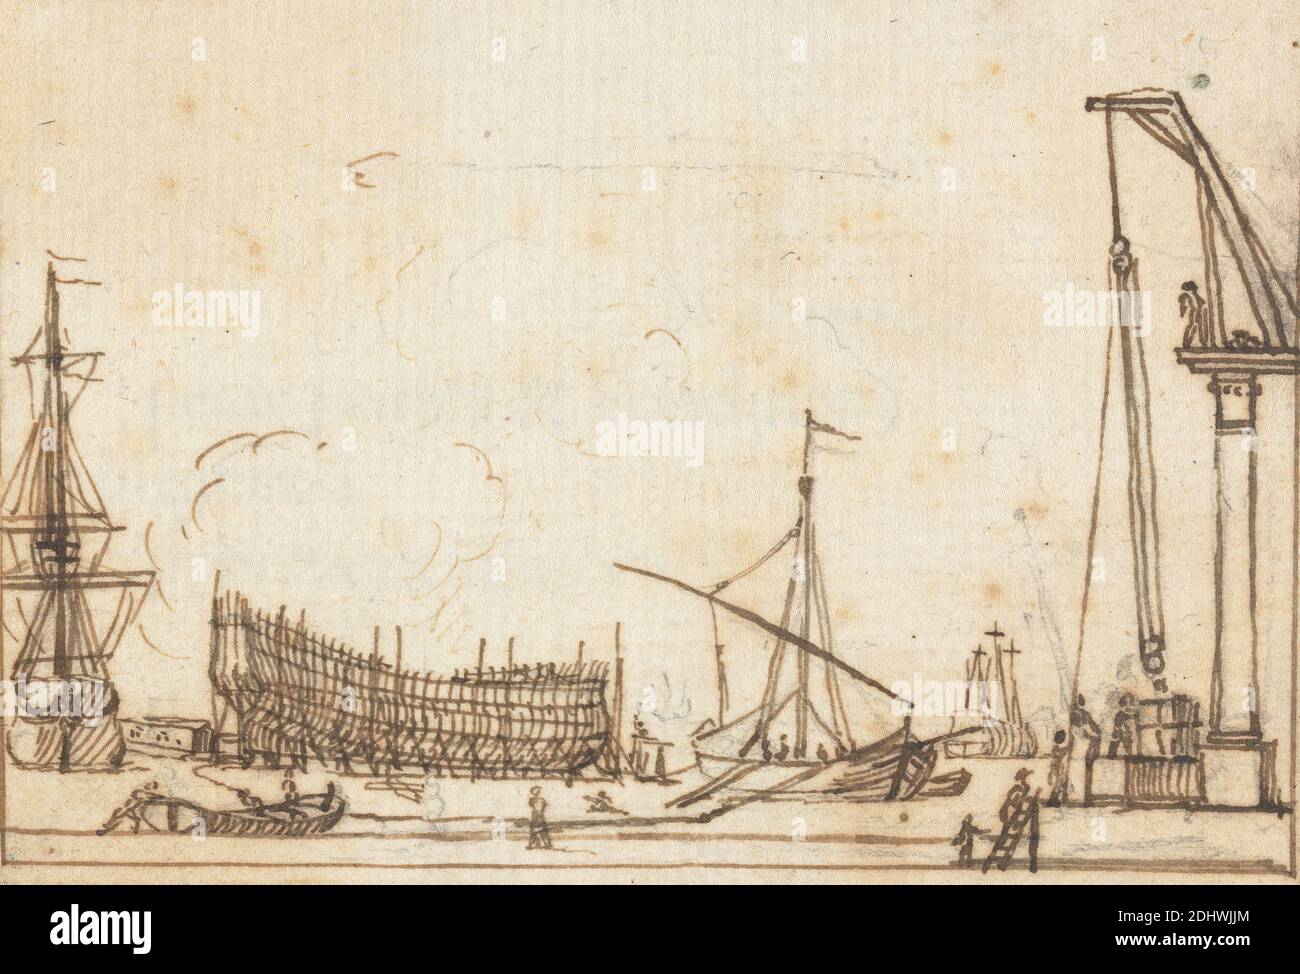 Dock Scene: Boats and Ships of Various Sizes; Ship-Building; Pully-like Machines with Operators, Joseph Cartwright, c.1789–1829, British, undated, Pen, in brown ink and graphite on moderately thick, moderately textured, beige, laid paper, mounted on moderately thick, smooth, beige, wove paper, Mount: 14 3/8 × 16 3/4 inches (36.5 × 42.5 cm) and Sheet: 2 5/8 × 3 13/16 inches (6.7 × 9.7 cm Stock Photo